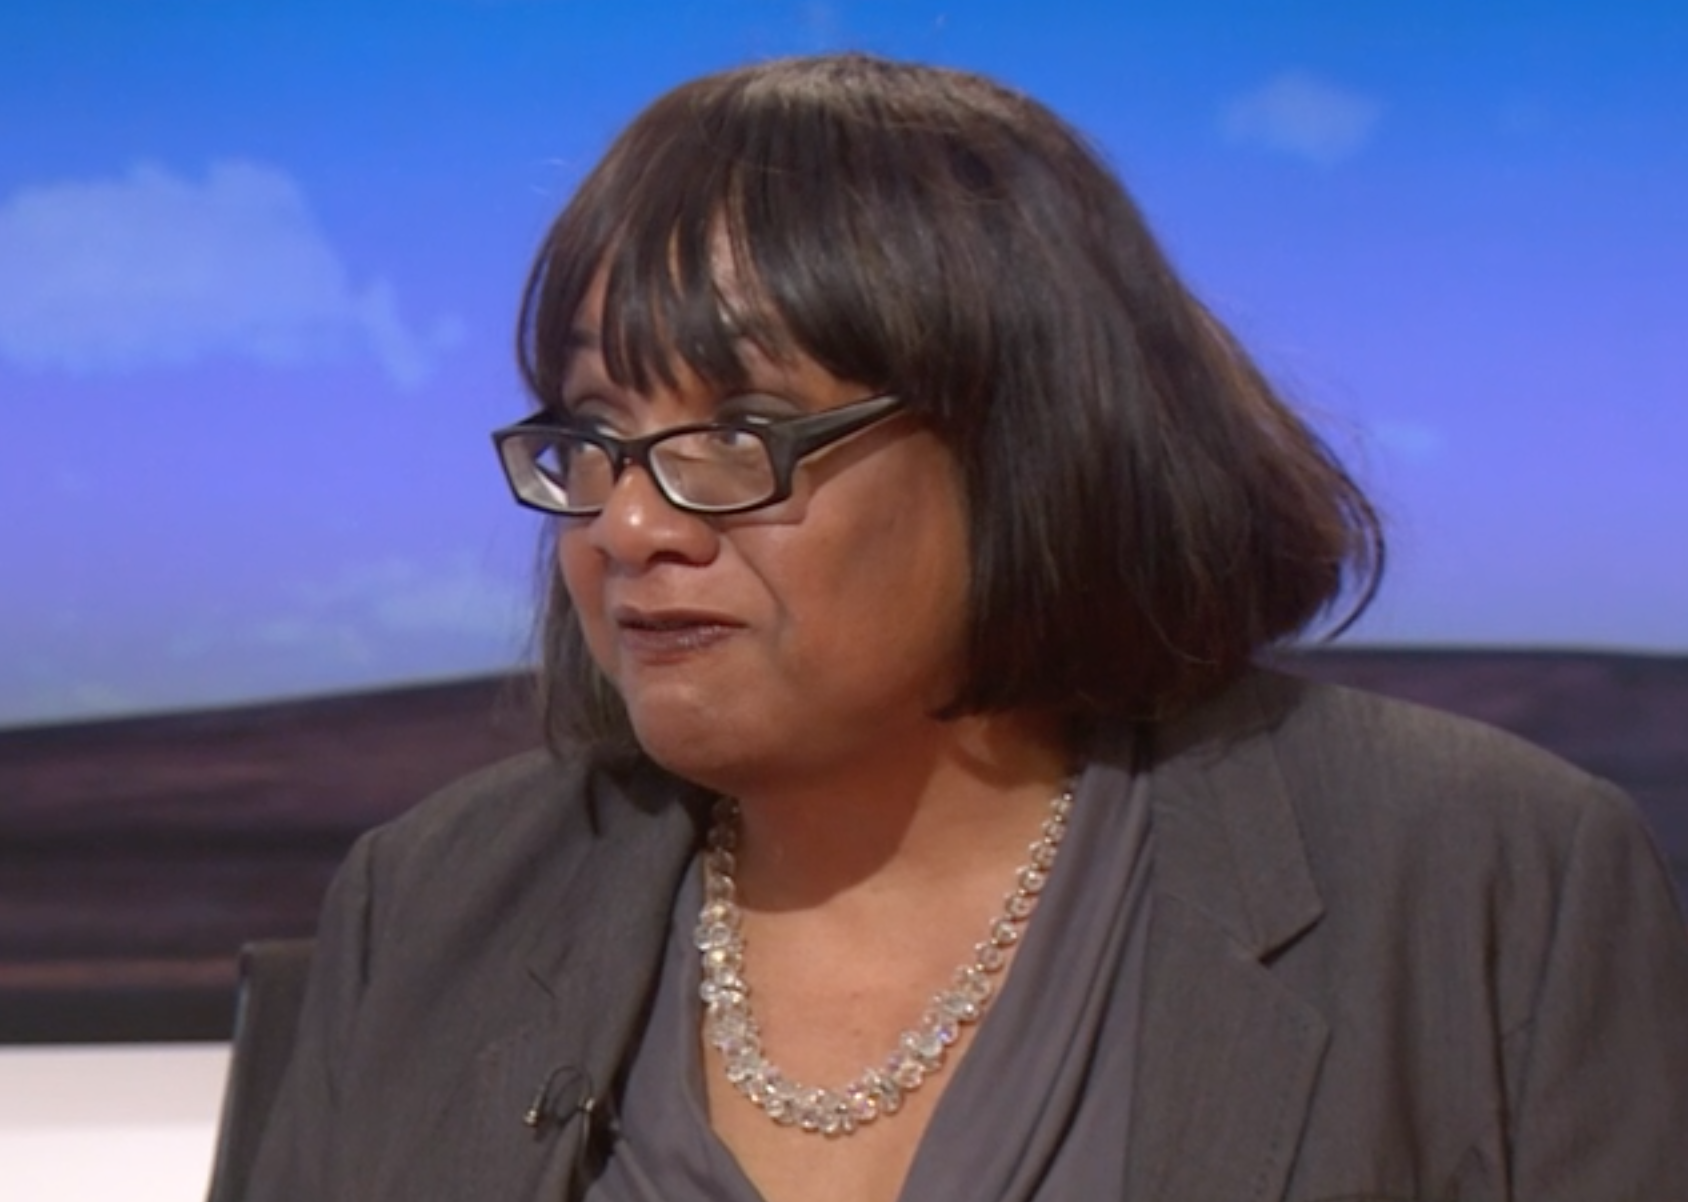 On the ‘Daily Politics’ show, Diane Abbott was made to sit through her own extraordinarily bad interview